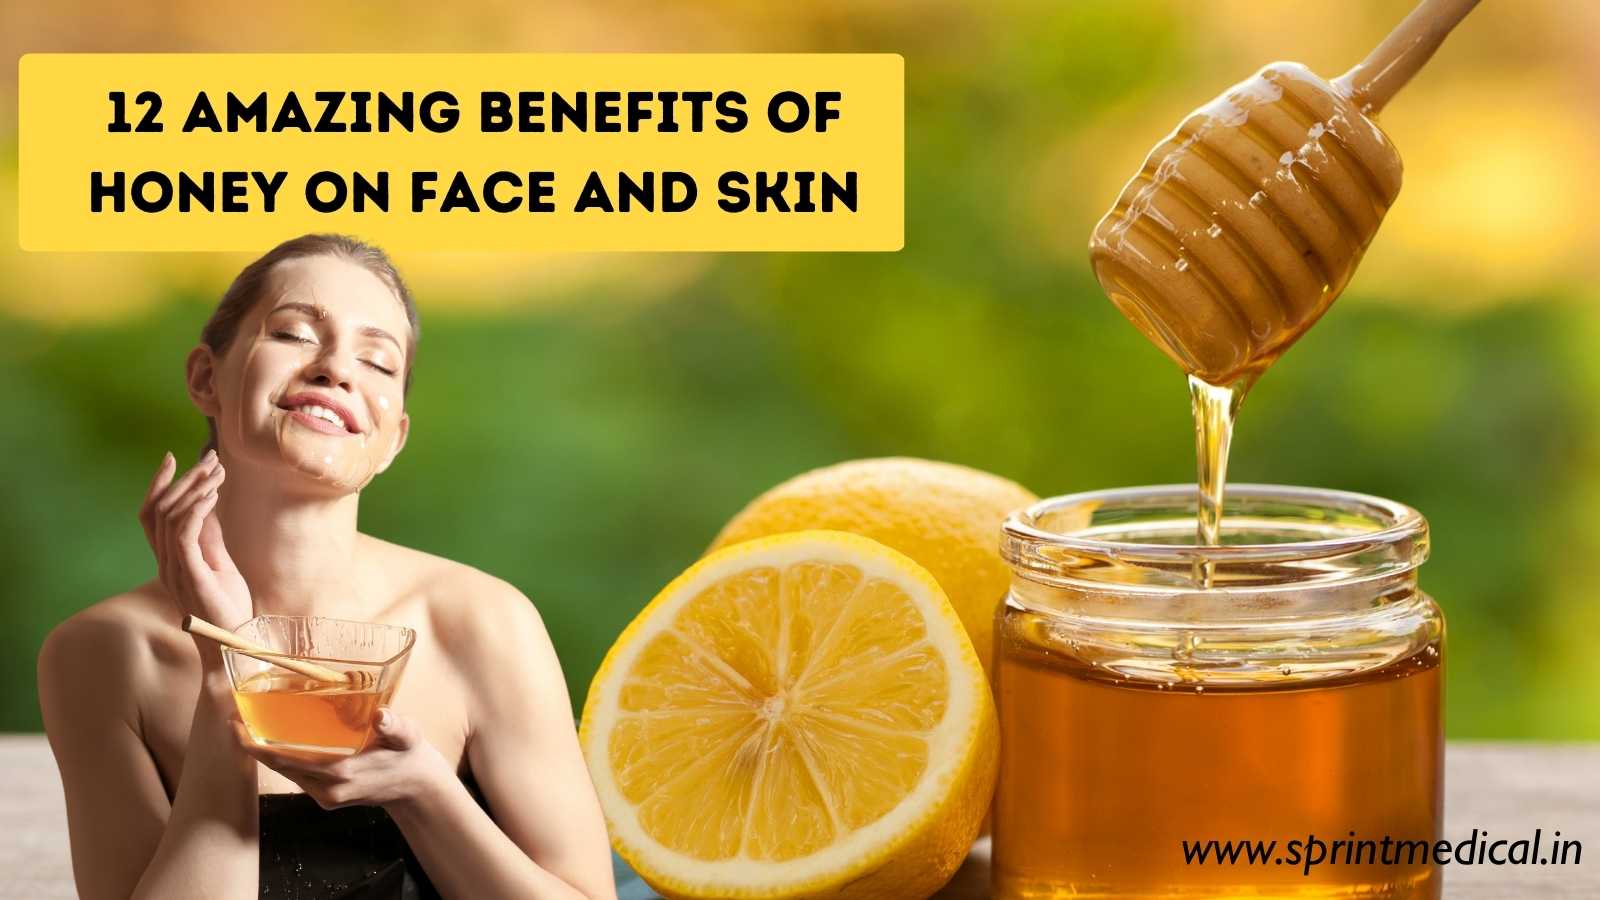 Can Honey be Useful in Preventing Acne?